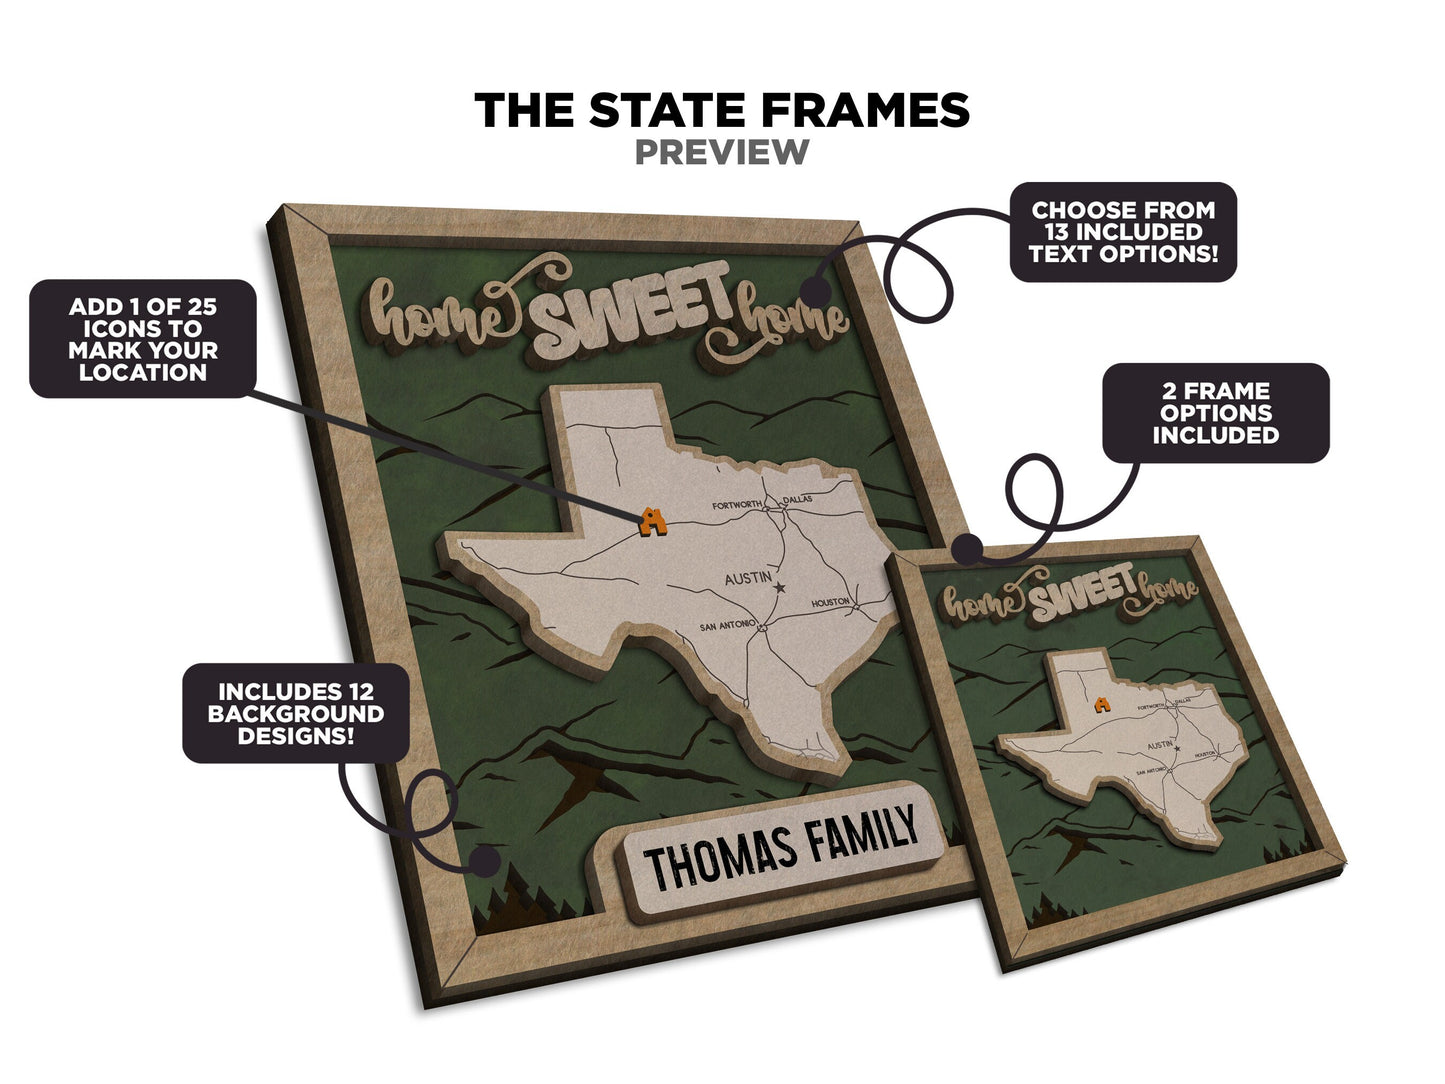 The Tennessee State Frame - 13 text options, 12 backgrounds, 25 icons Included - Make over 7,500 designs - Glowforge & Lightburn Tested